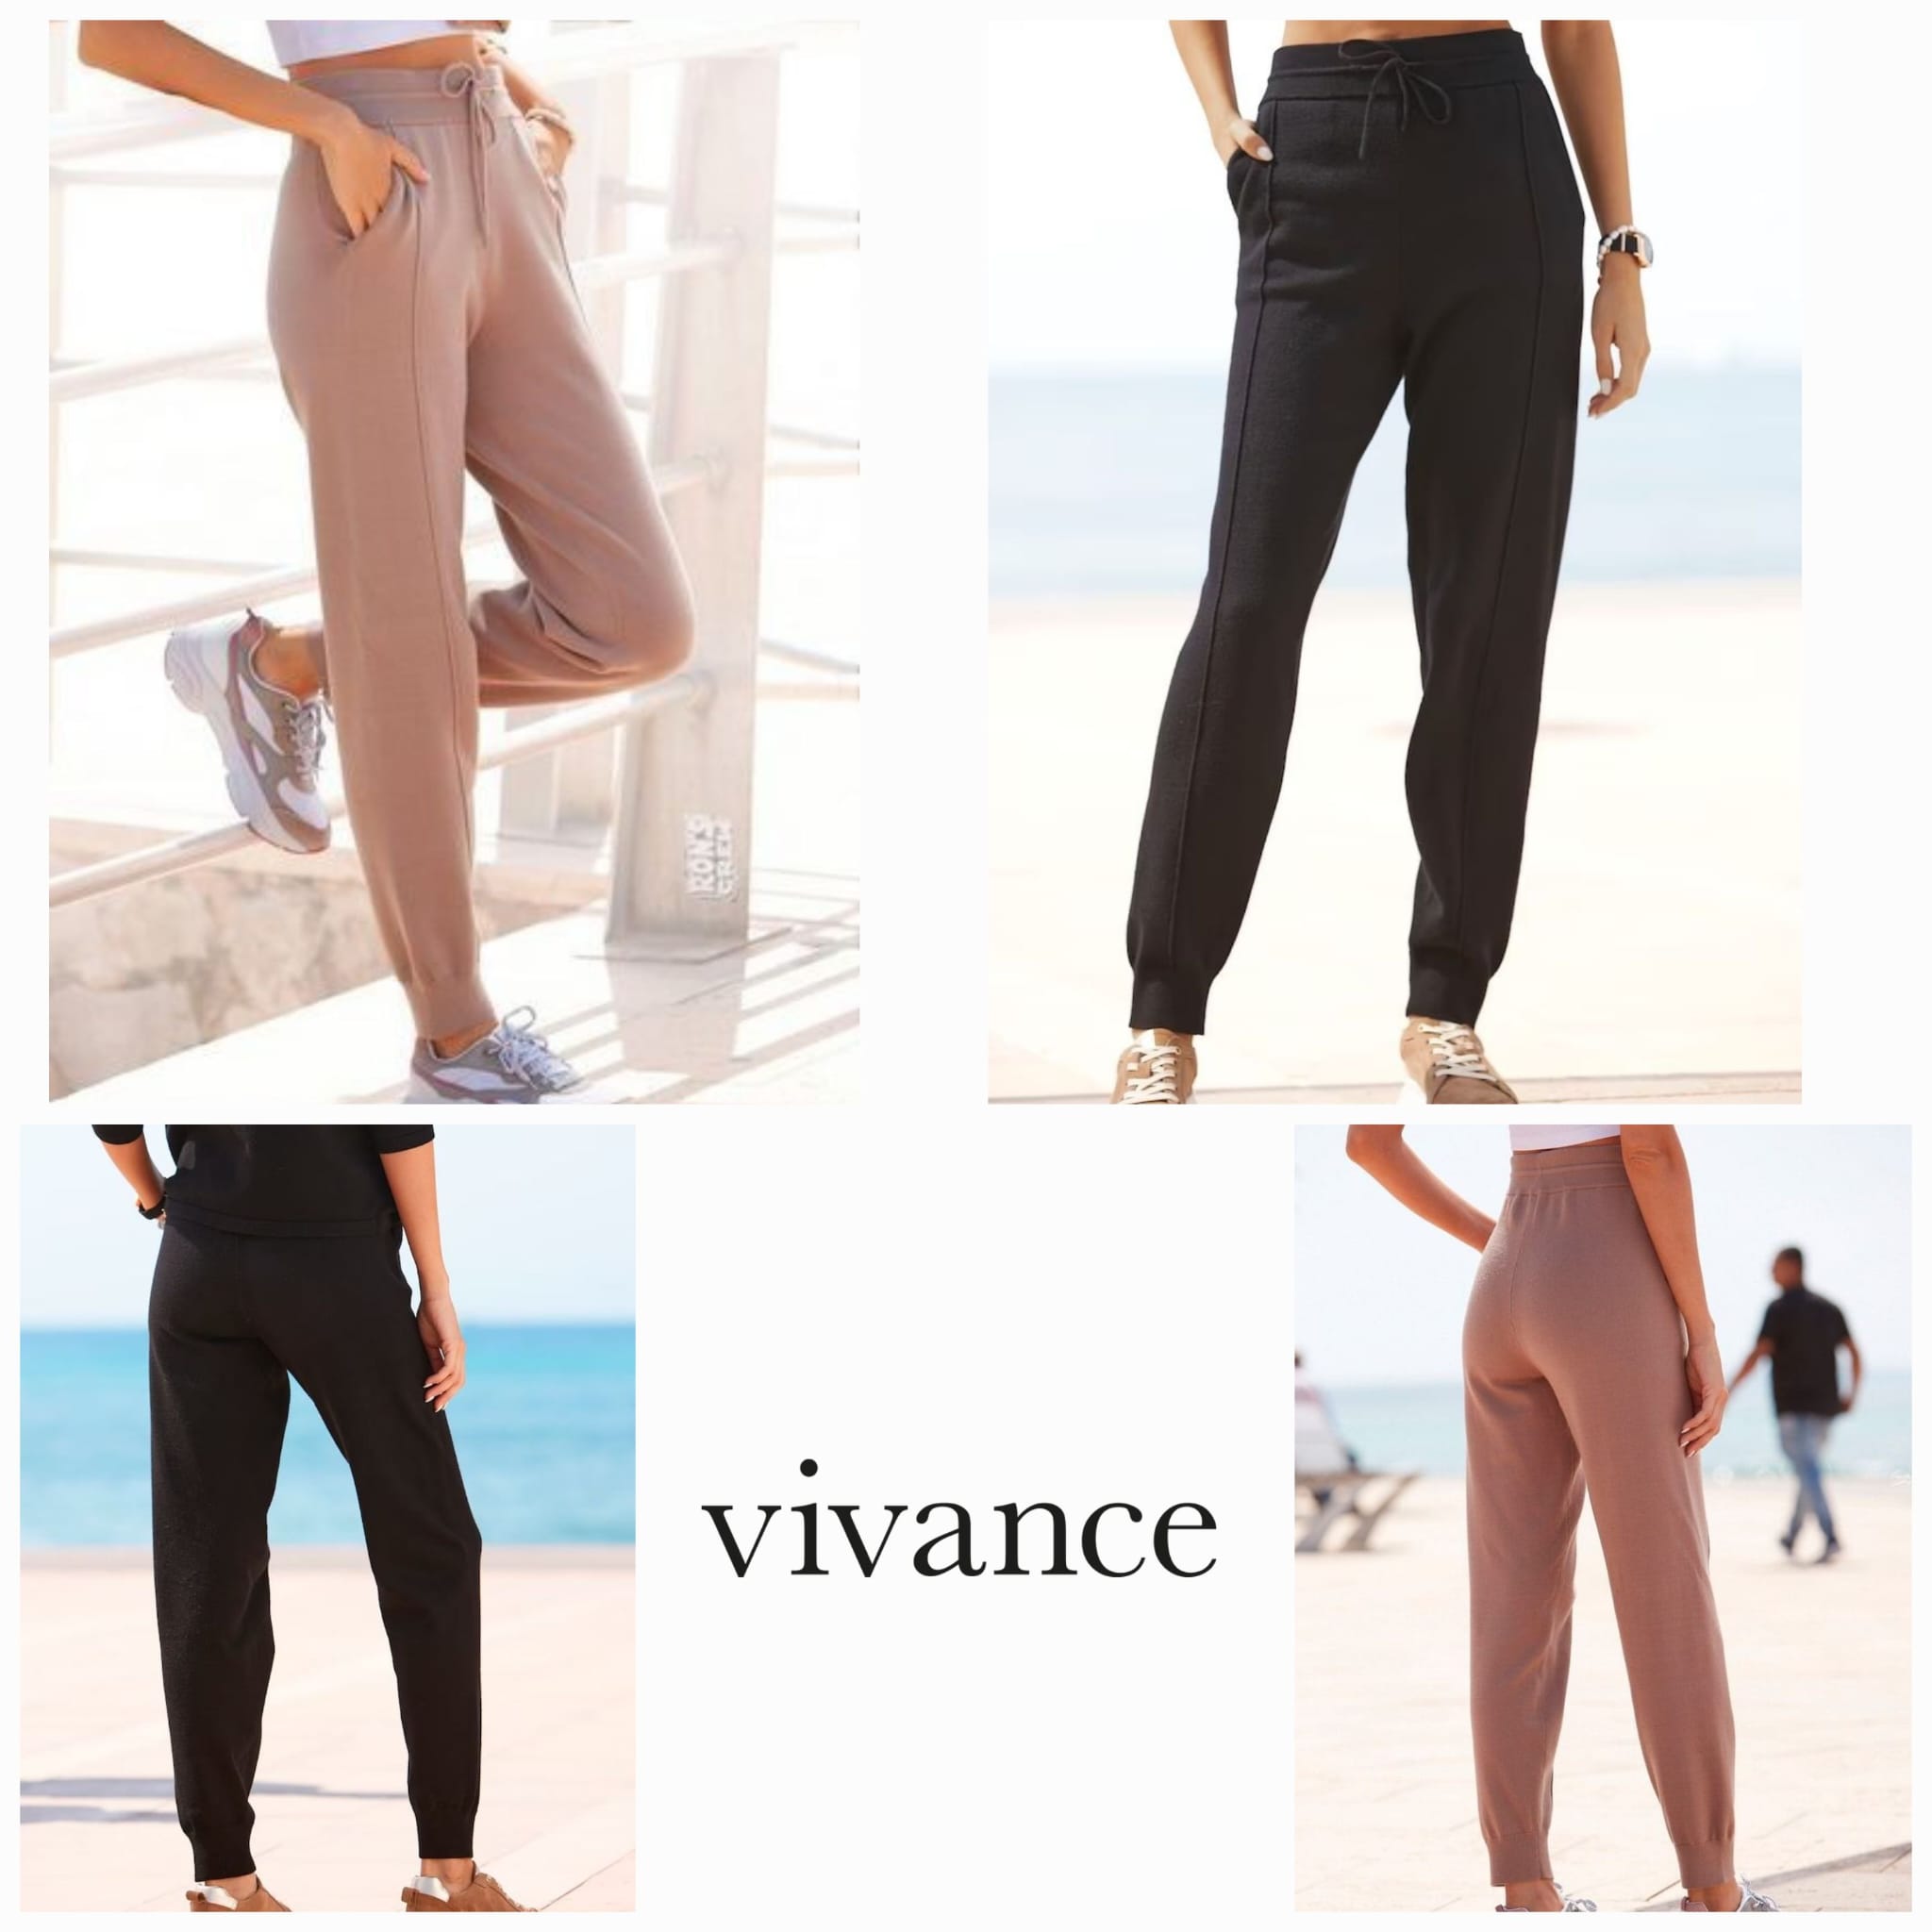 Women's knitted trousers from Vivance